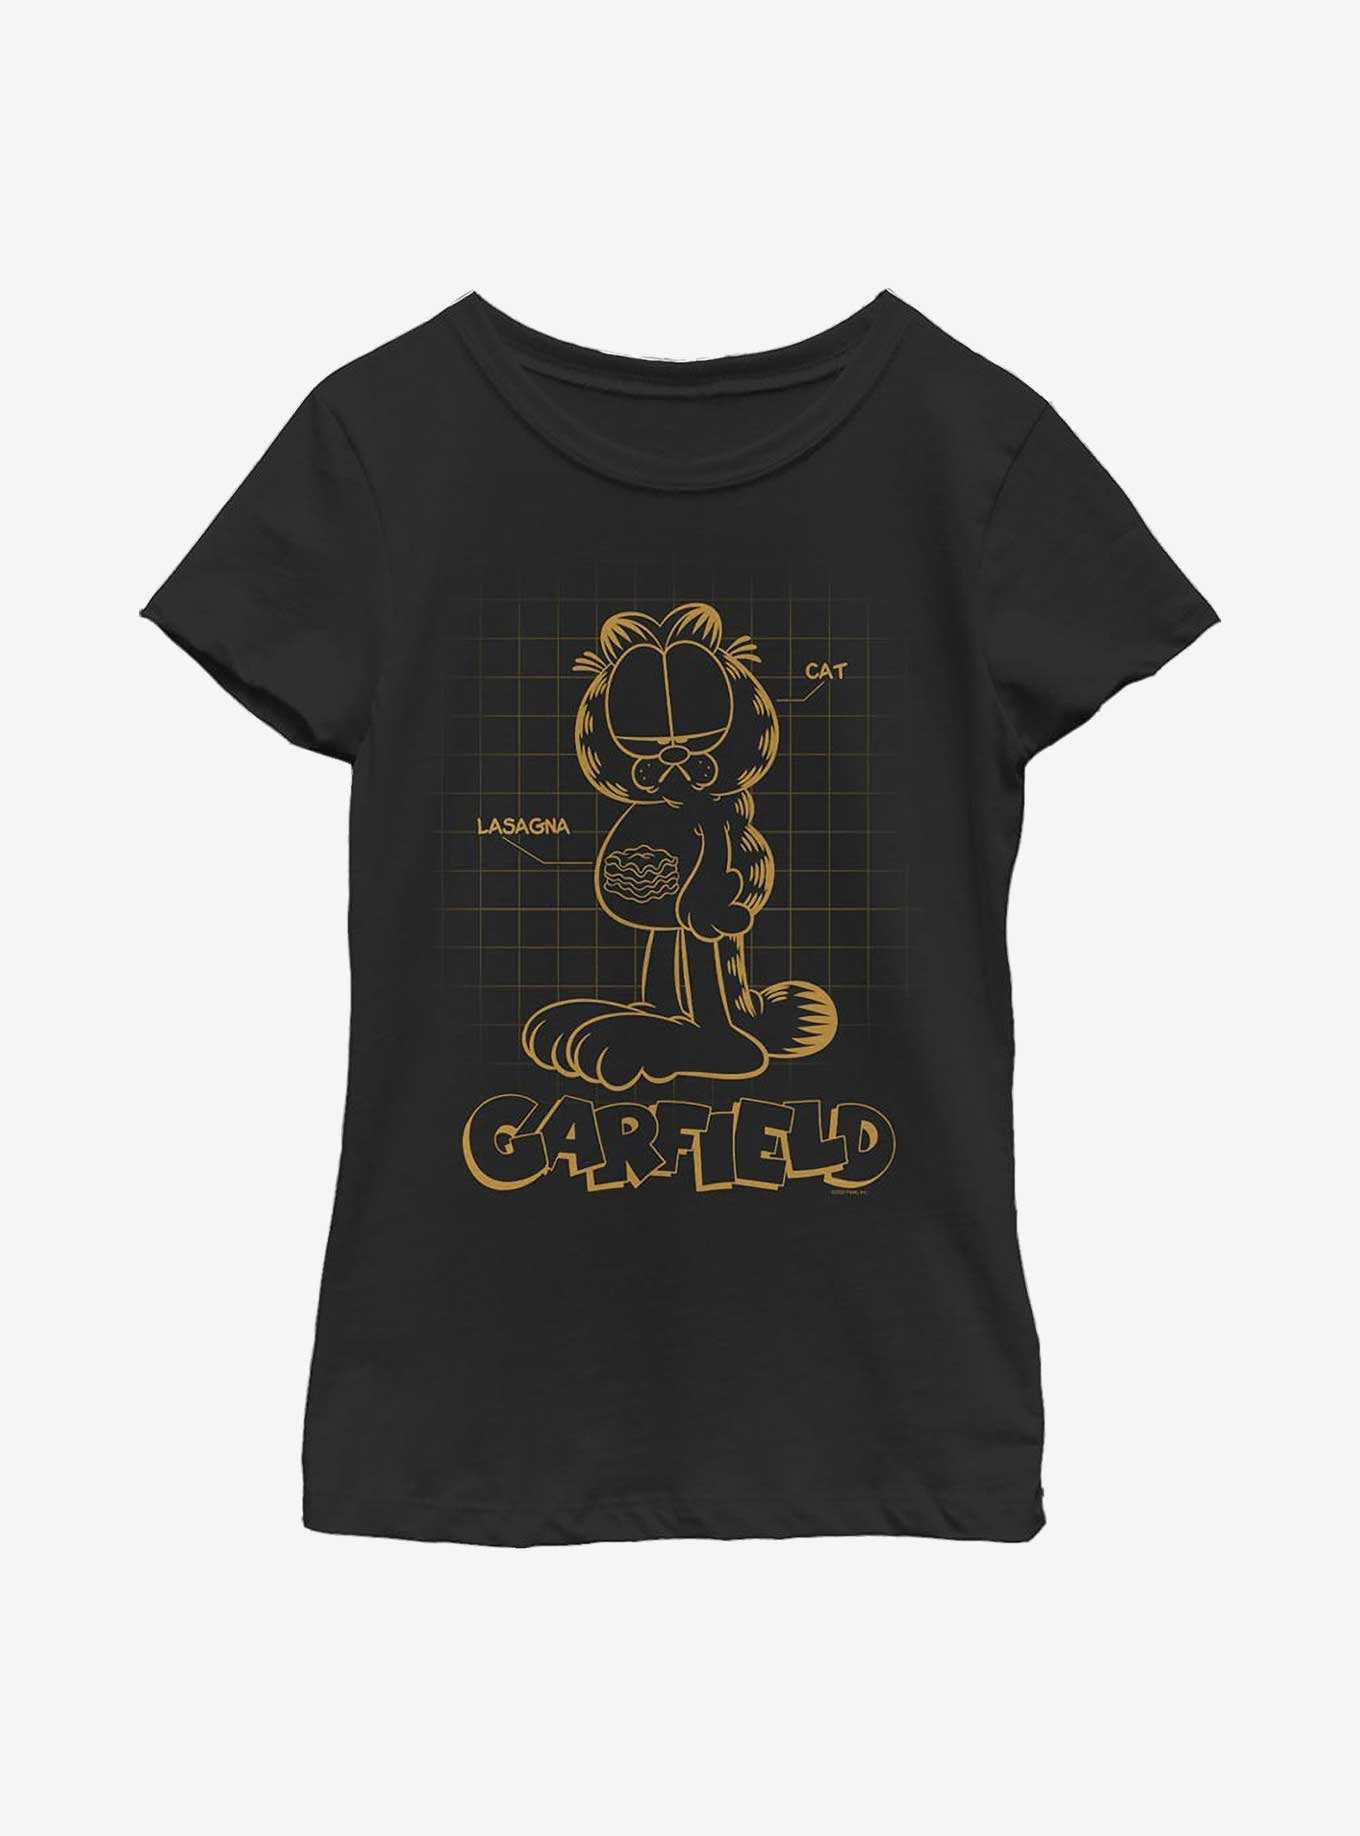 Garfield Cat Schematic Youth Girl's T-Shirt, , hi-res